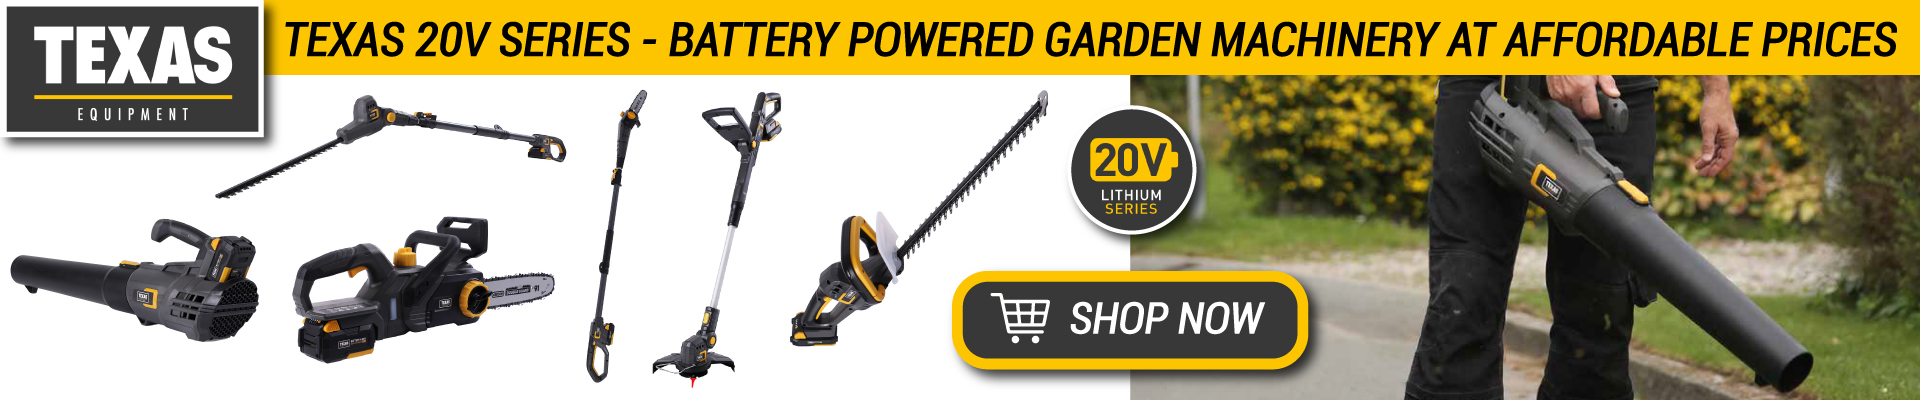 Texas 20V Series - Battery-Powered Garden Machinery at Affordable Prices